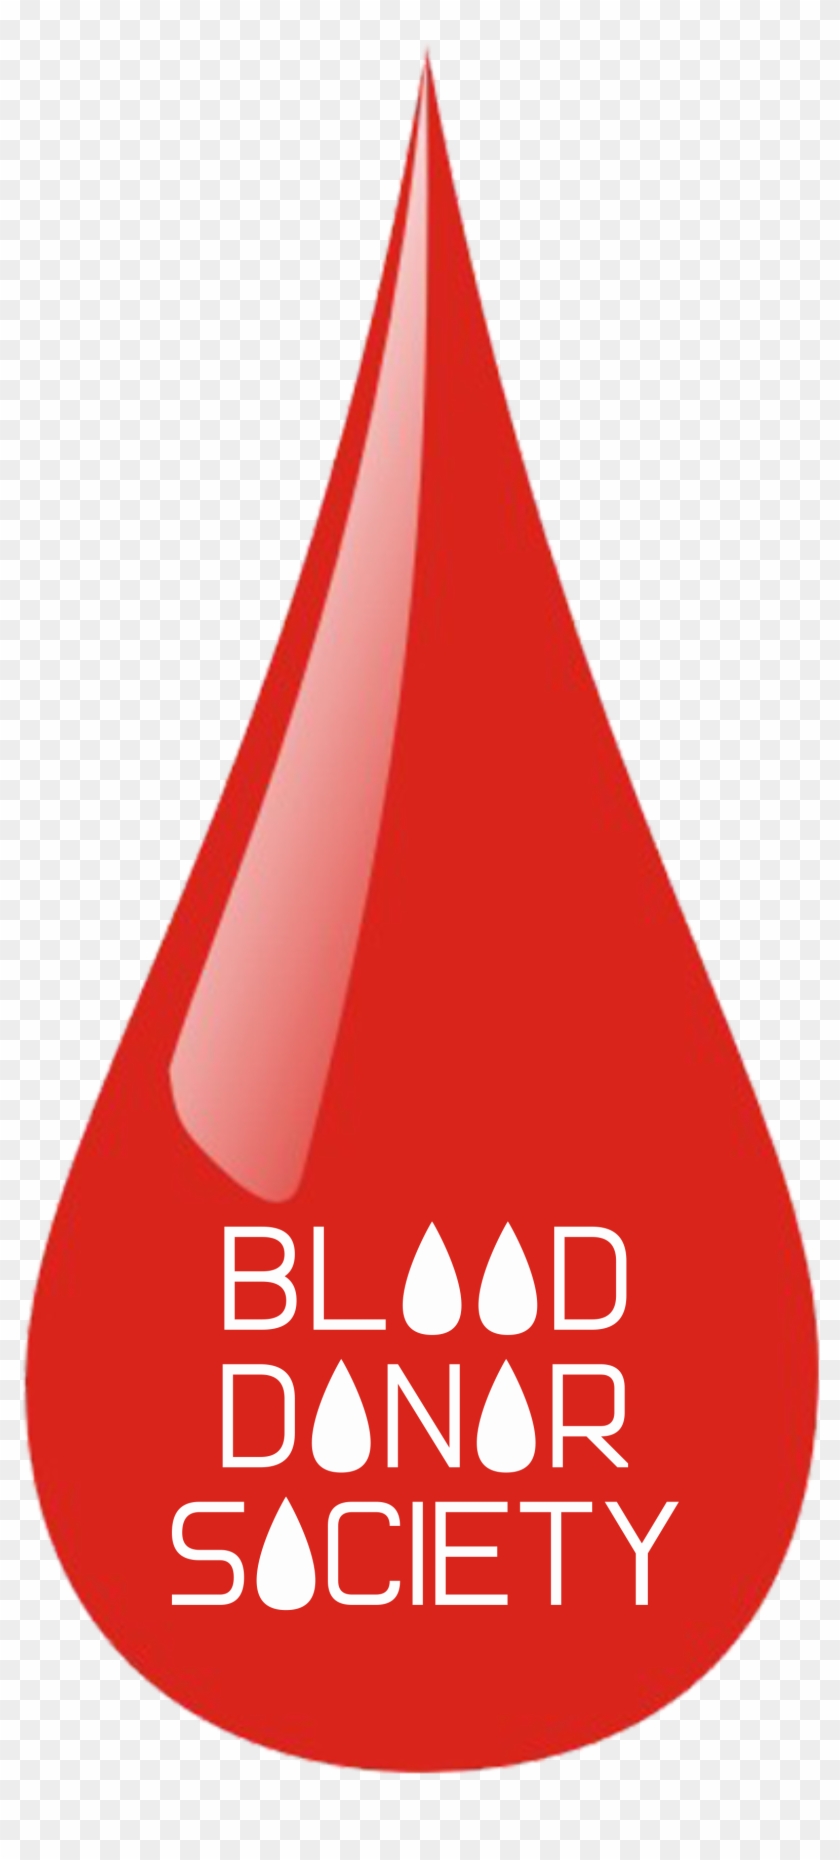 Blood Donor Society - Blood Donor Society Logo Clipart